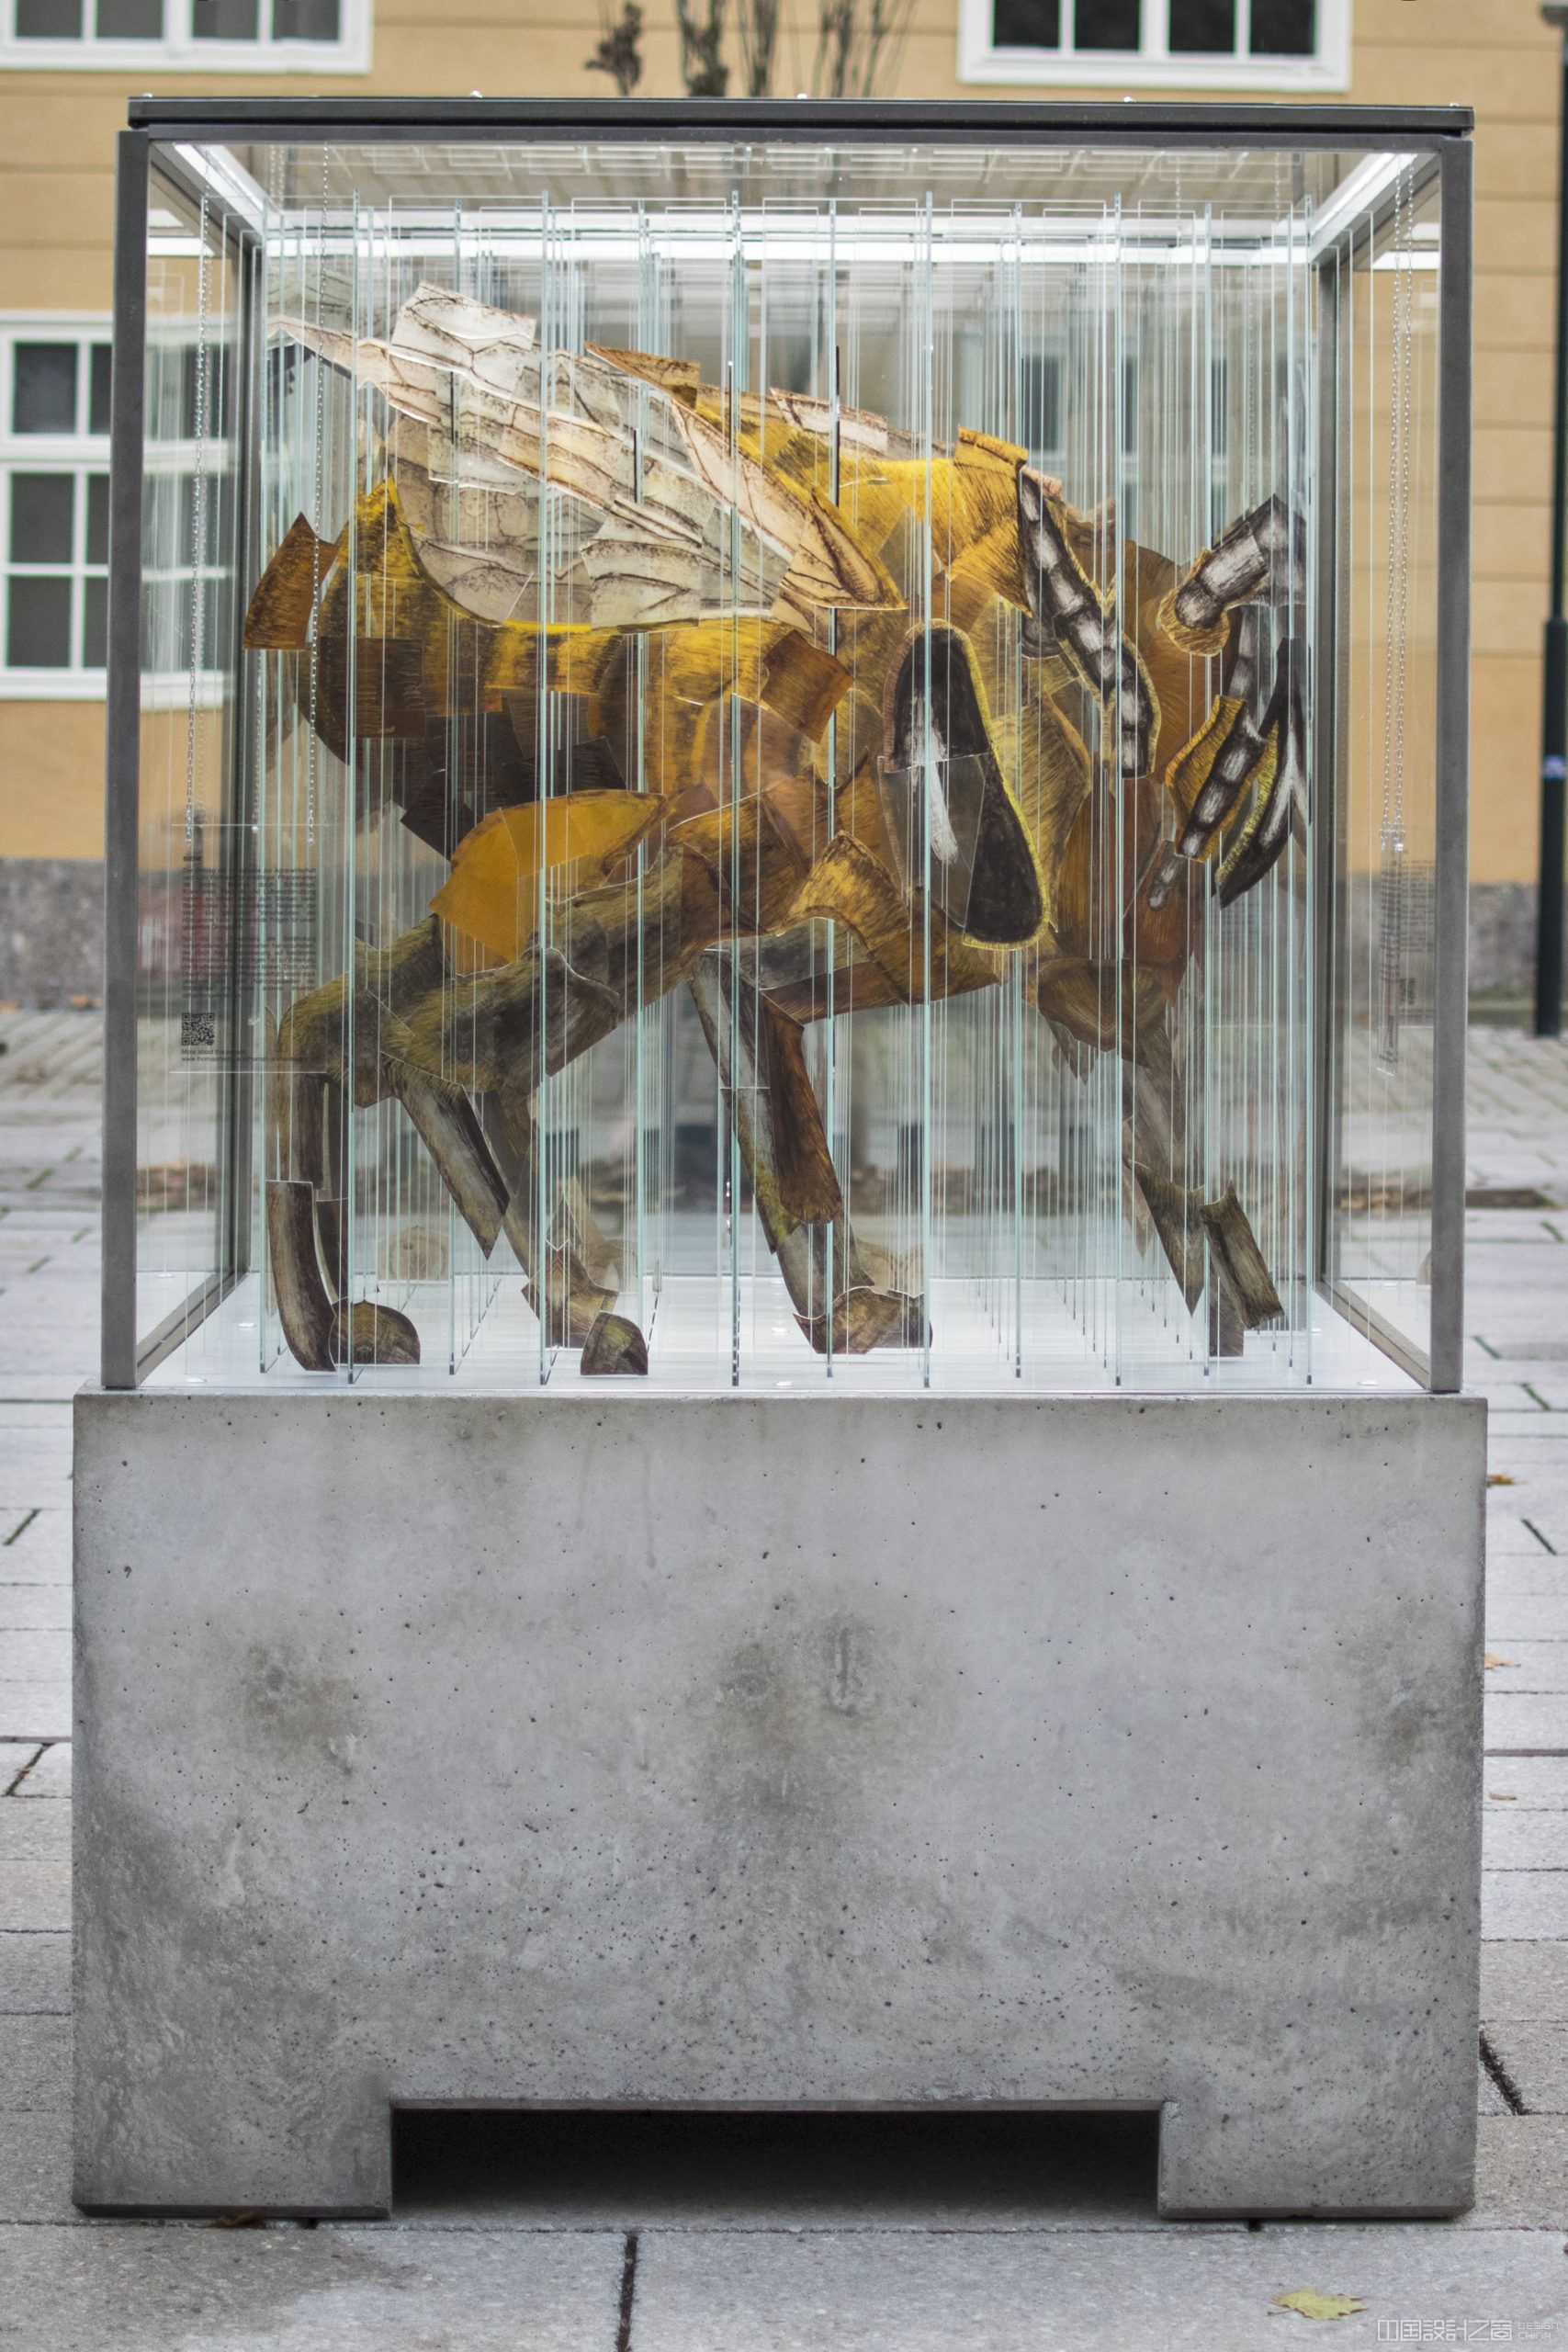 A sculpture in a glass and me<em></em>tal cube on a co<em></em>ncrete stand, co<em></em>ntaining more than 144 strips of glass that looks like a different animal on each side.